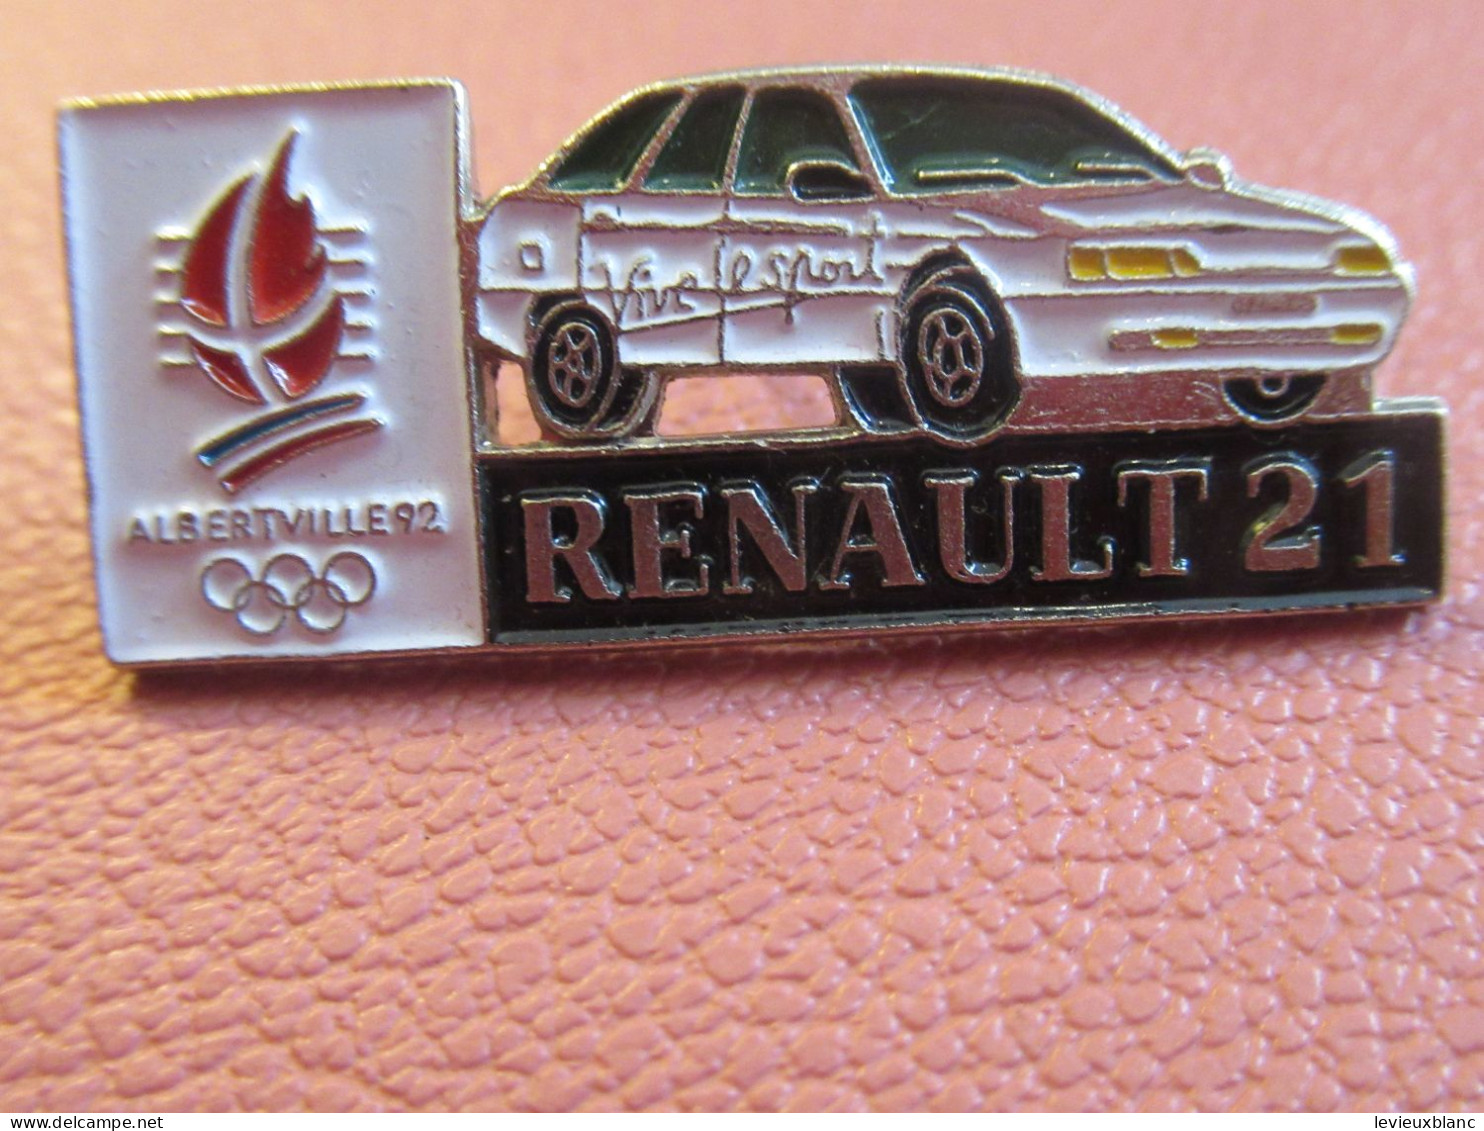 France/ " ALBERVILLE 92 Renault 21 " /COJO 91 /RENAULT 21  / 1991   INS230 - Olympic Games